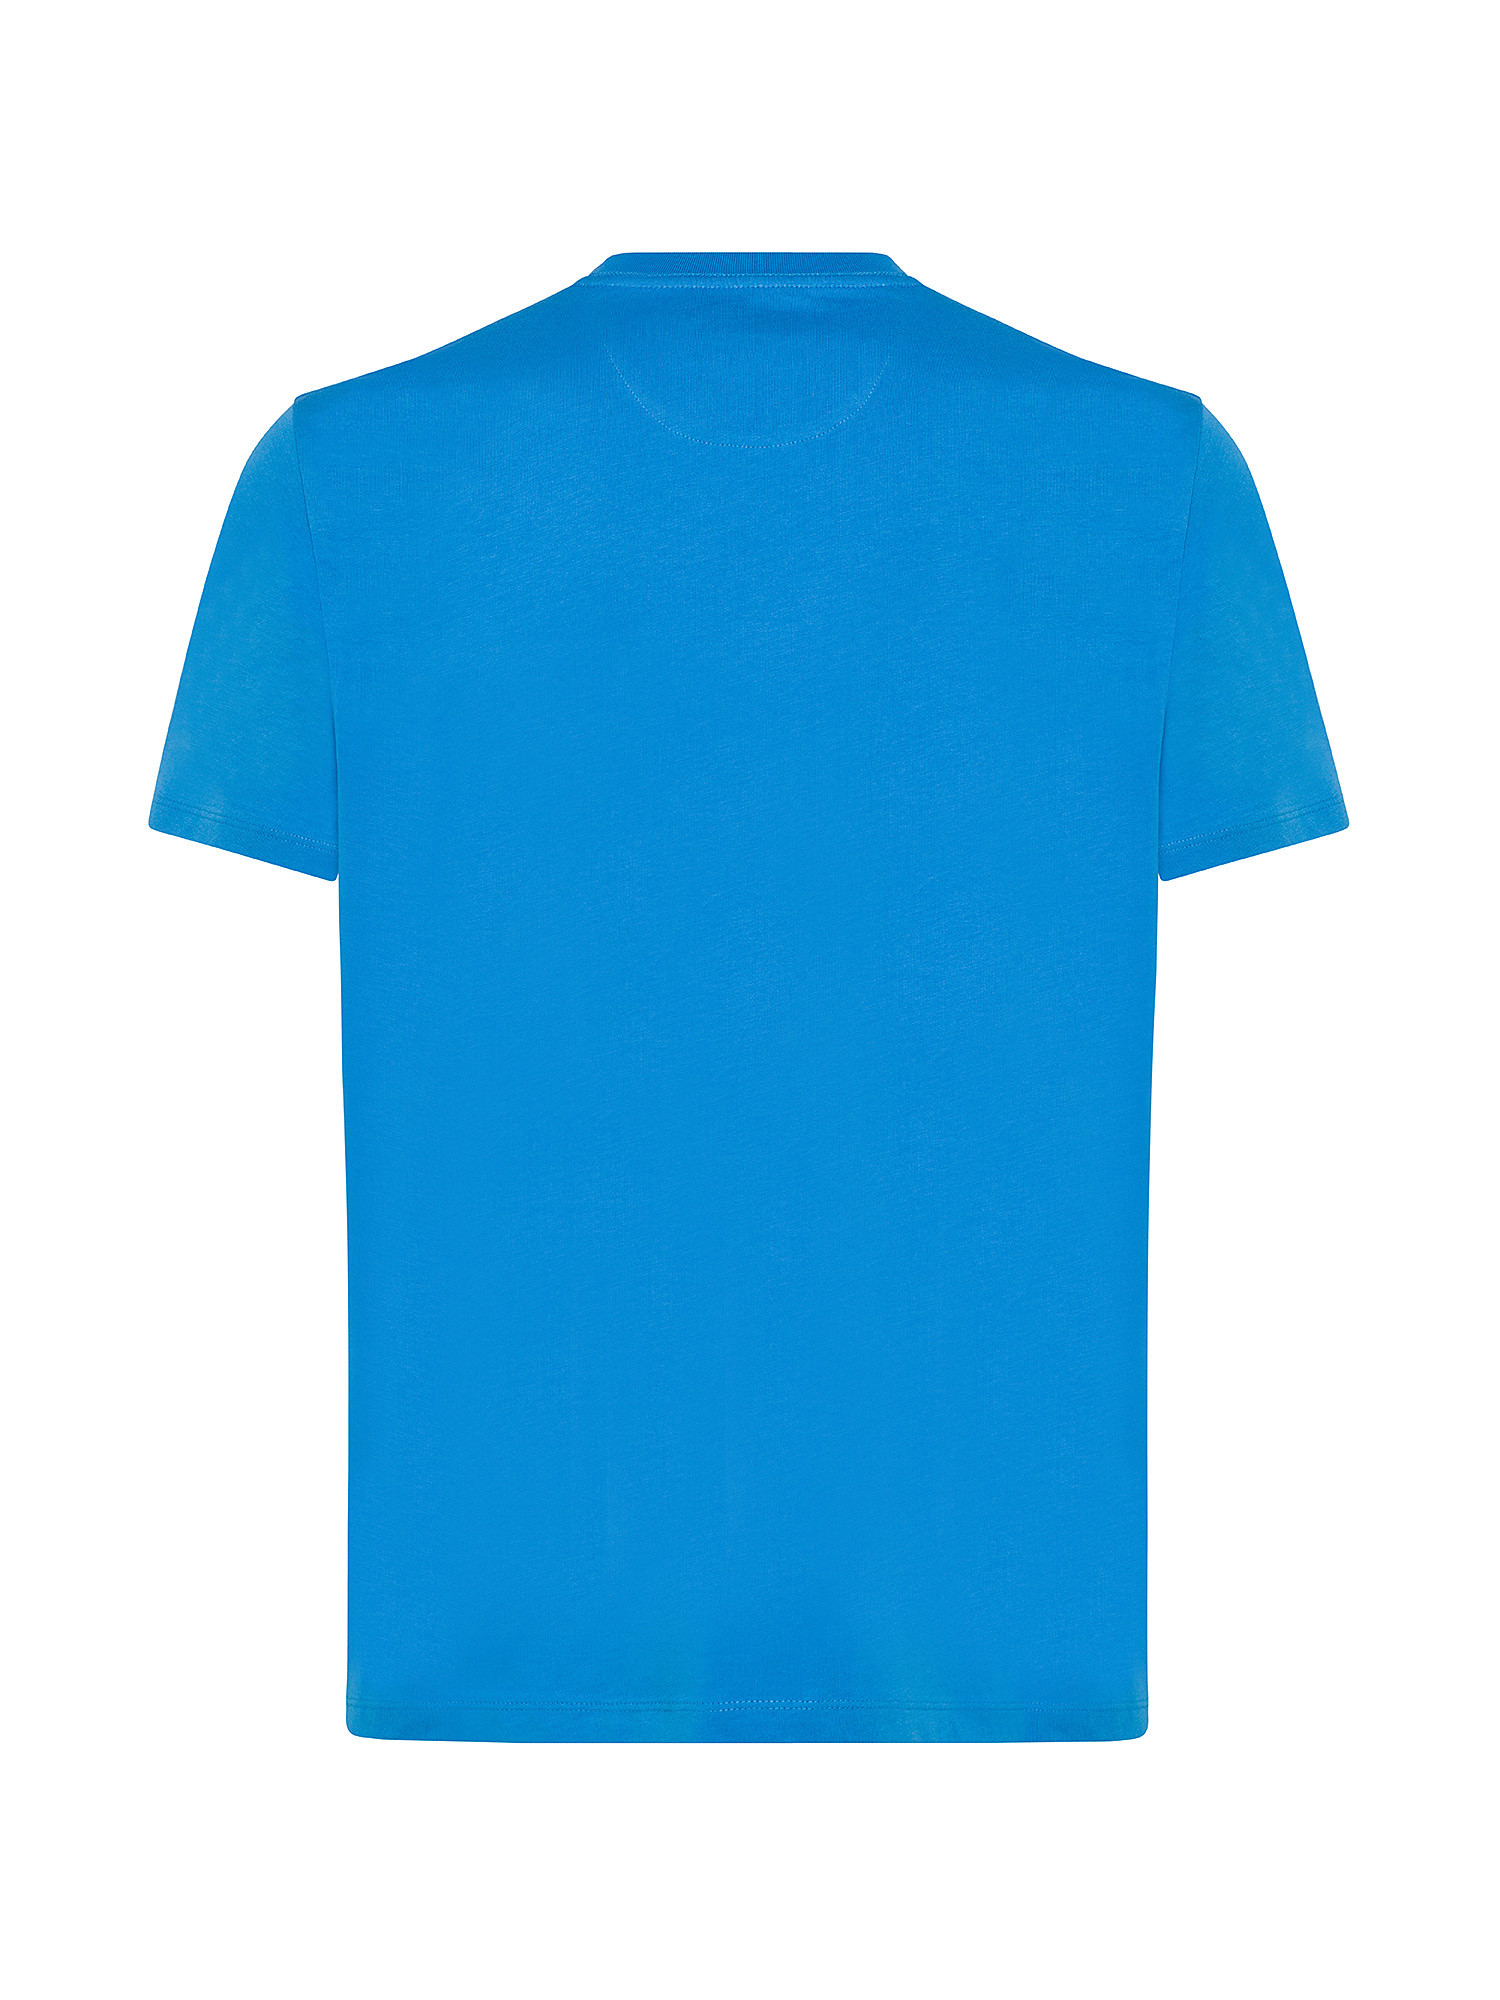 JCT - T-shirt in puro cotone supima, Azzurro, large image number 1